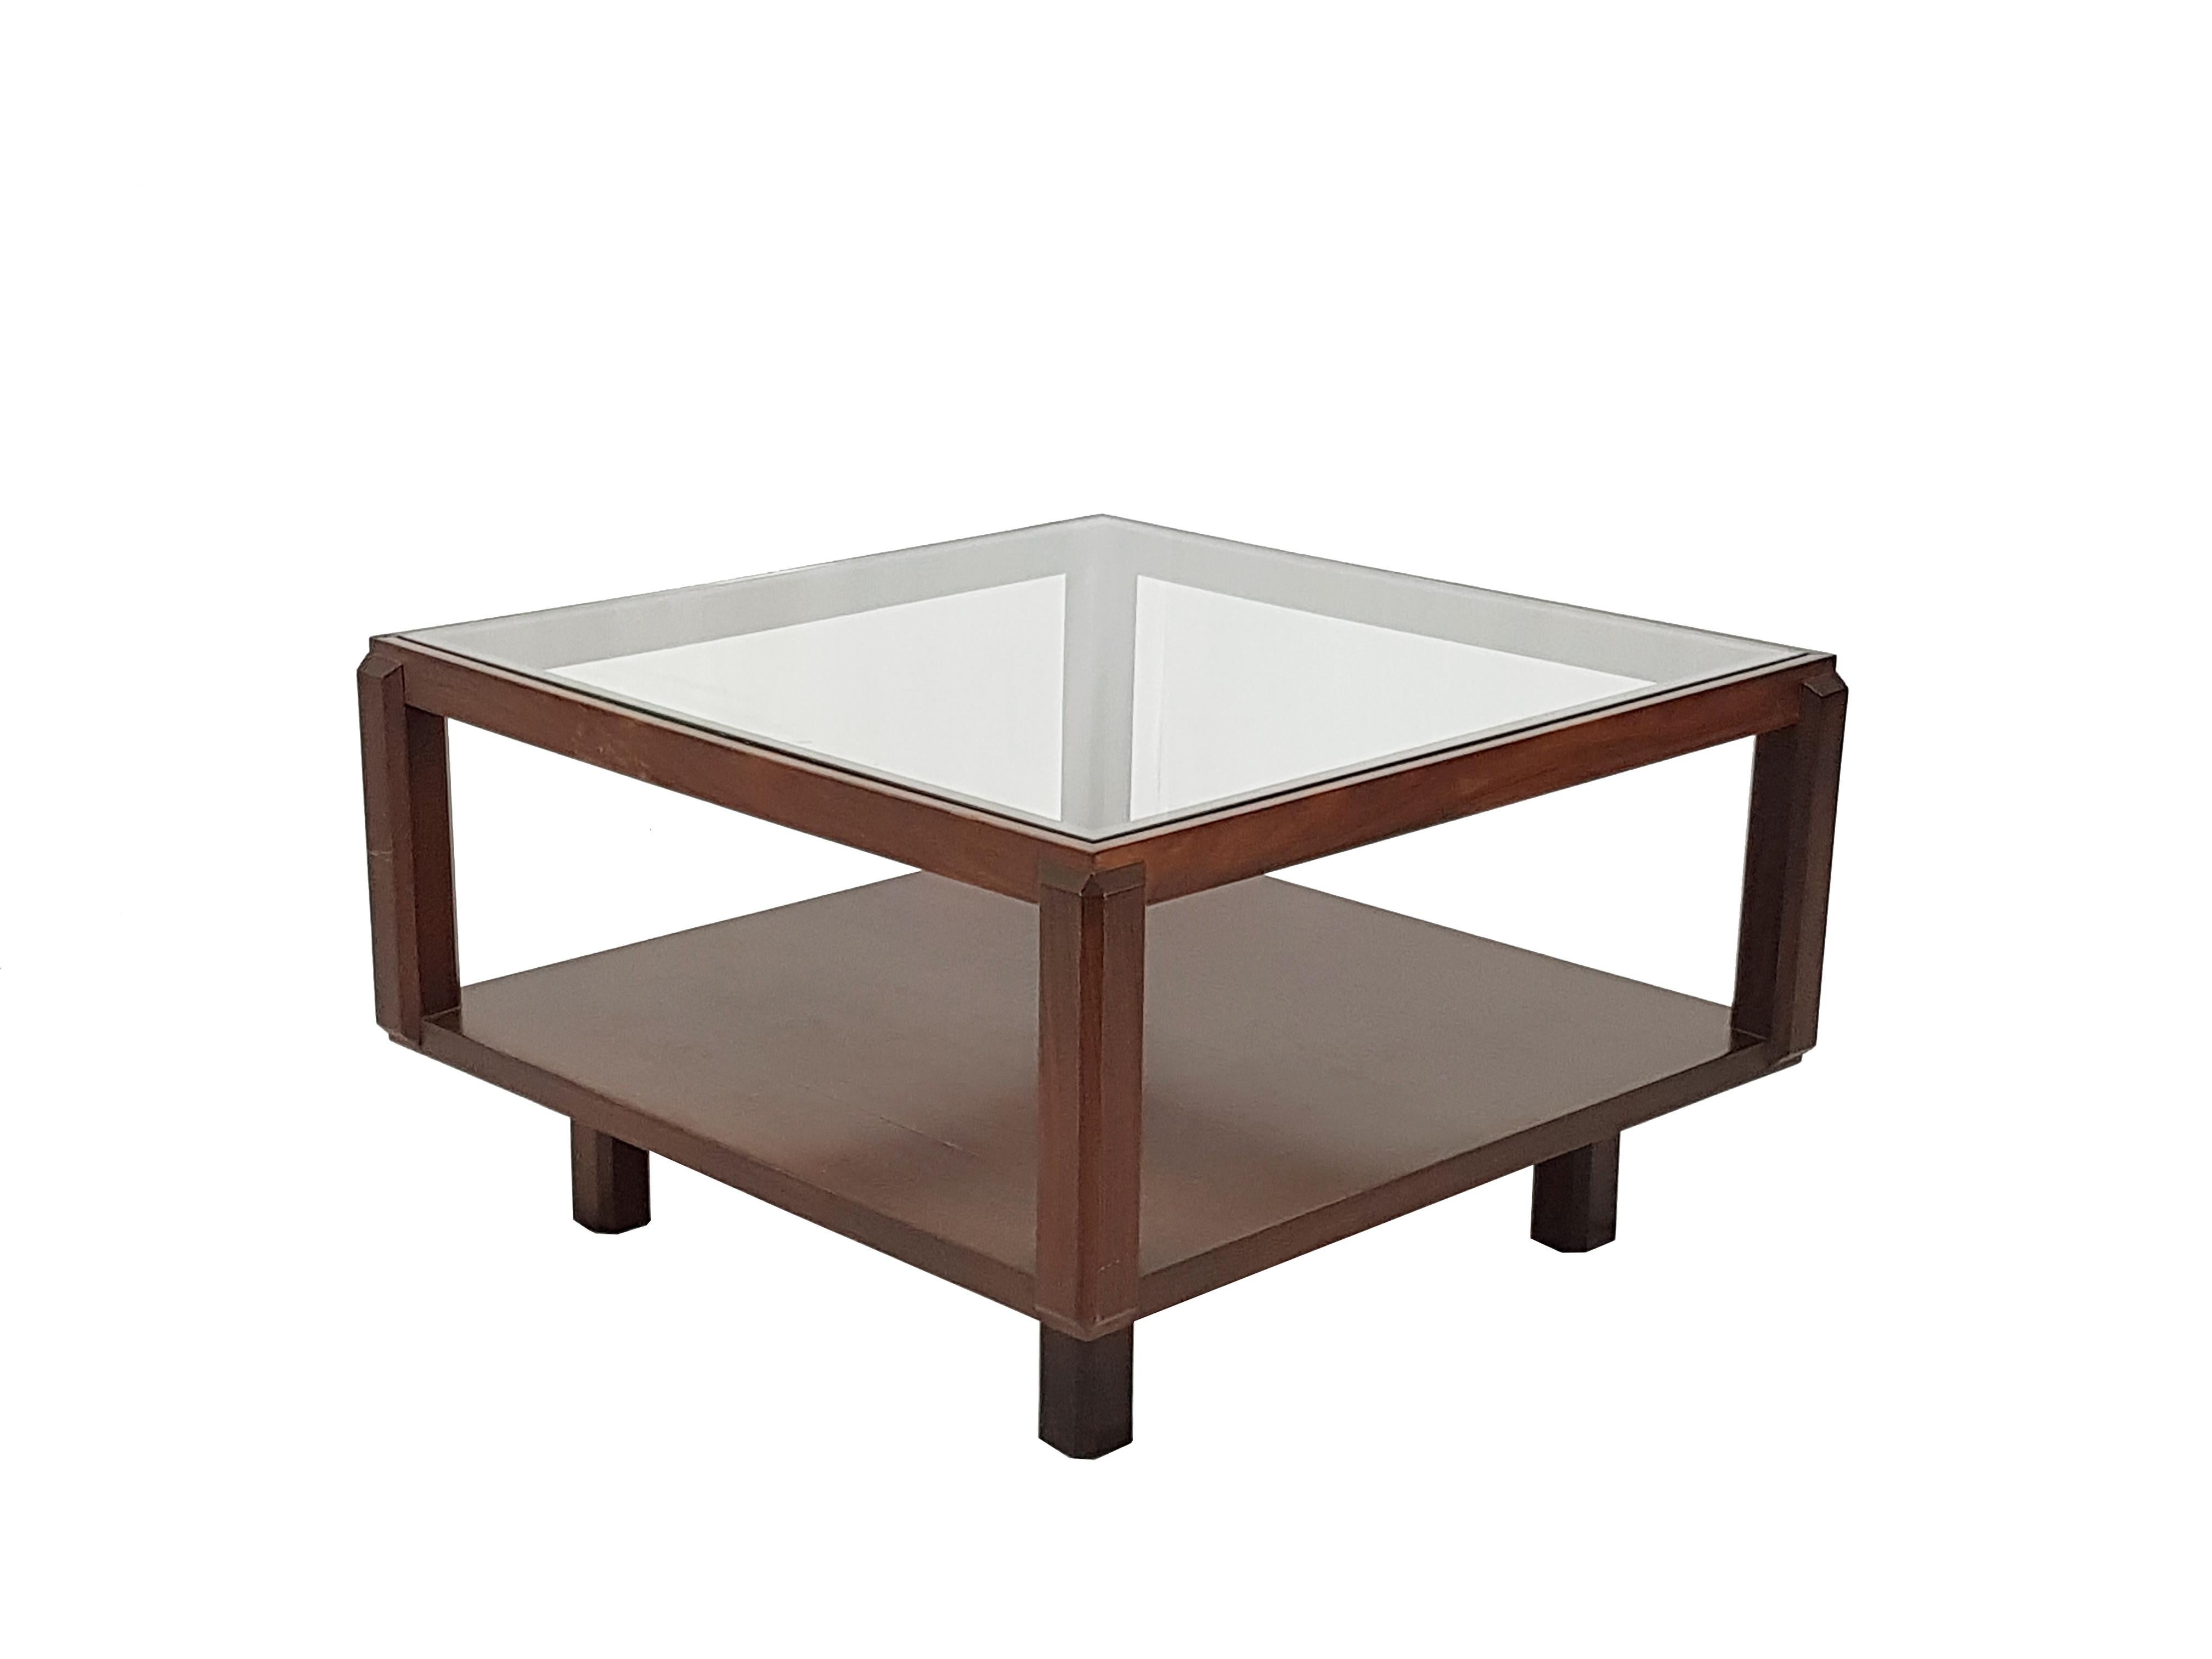 This coffee table was made from a rosewood faceted structure with a glass top.
It remains in good condition: a small chipping on one corner of the glass top as showed in picture. Two light scratched on the wooden frame.